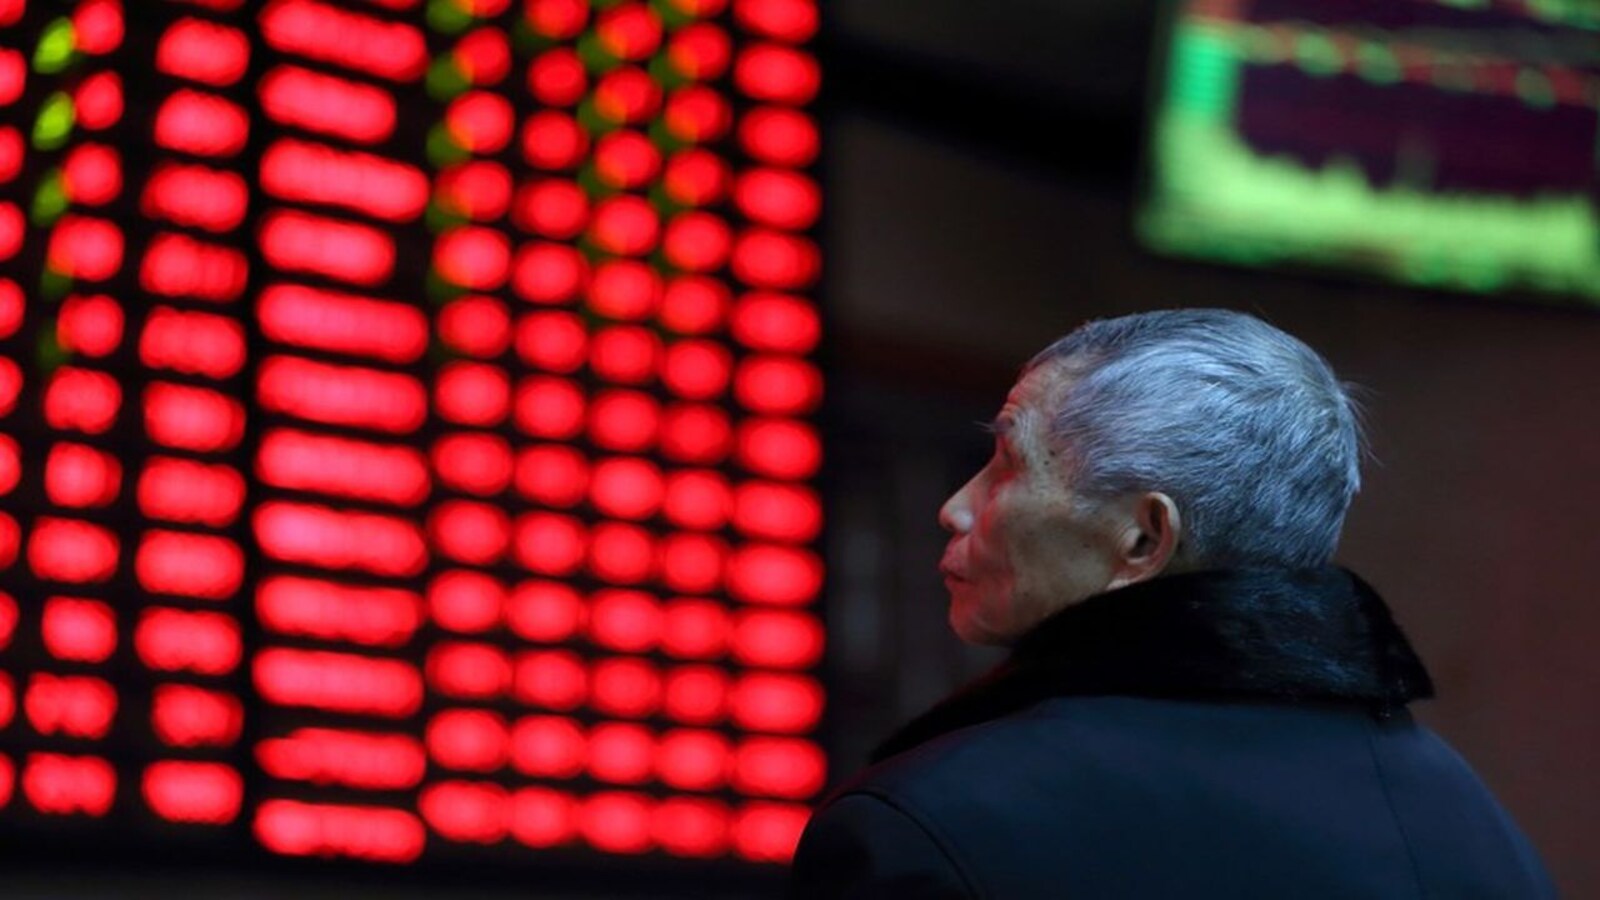 Stock market today: Asian markets are steady in holiday-thinned trade